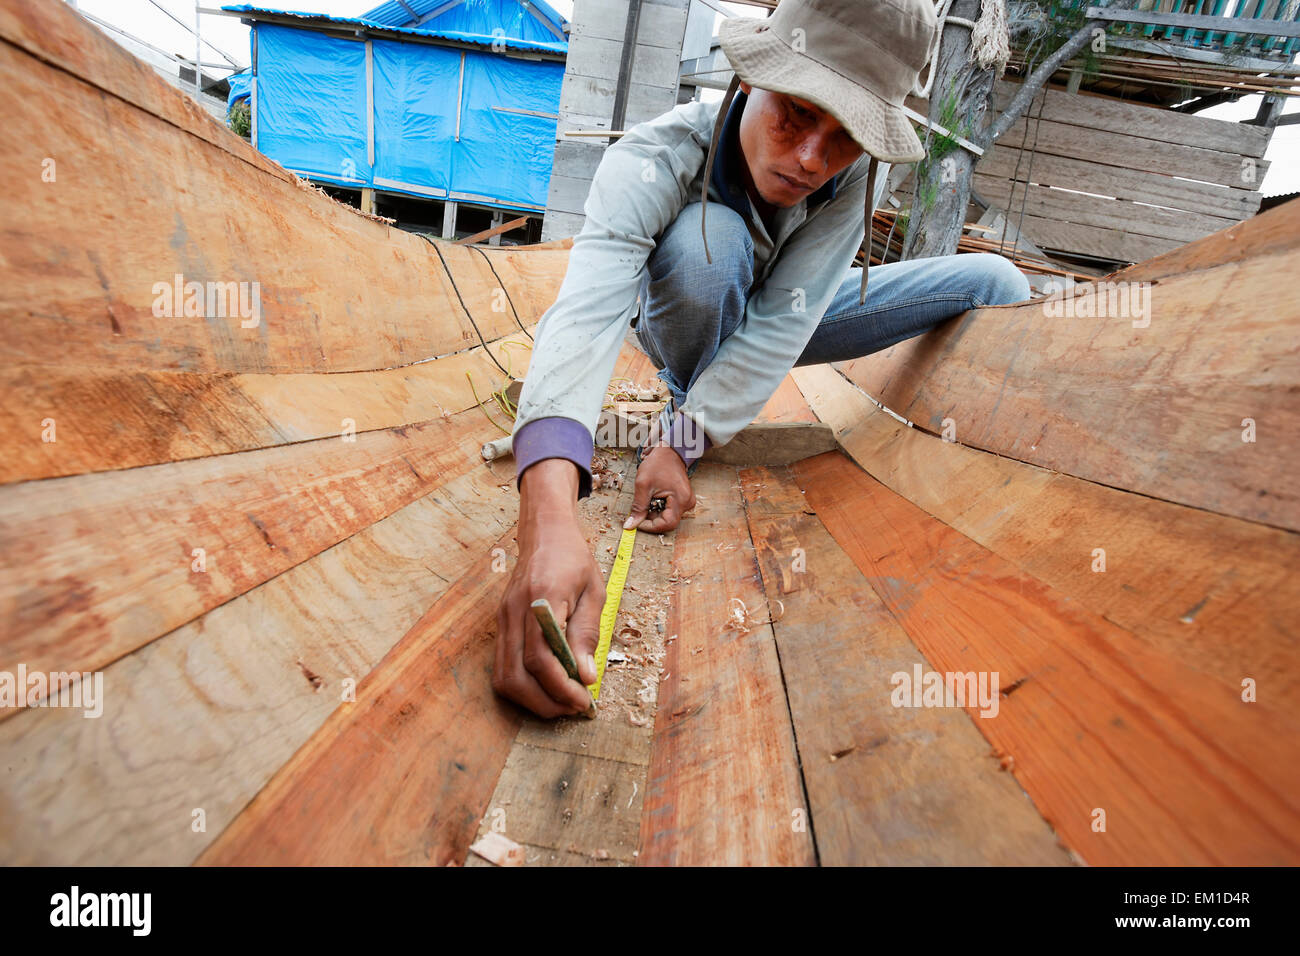 Skill,Indonesia,Boat Building,Aceh Province Stock Photo